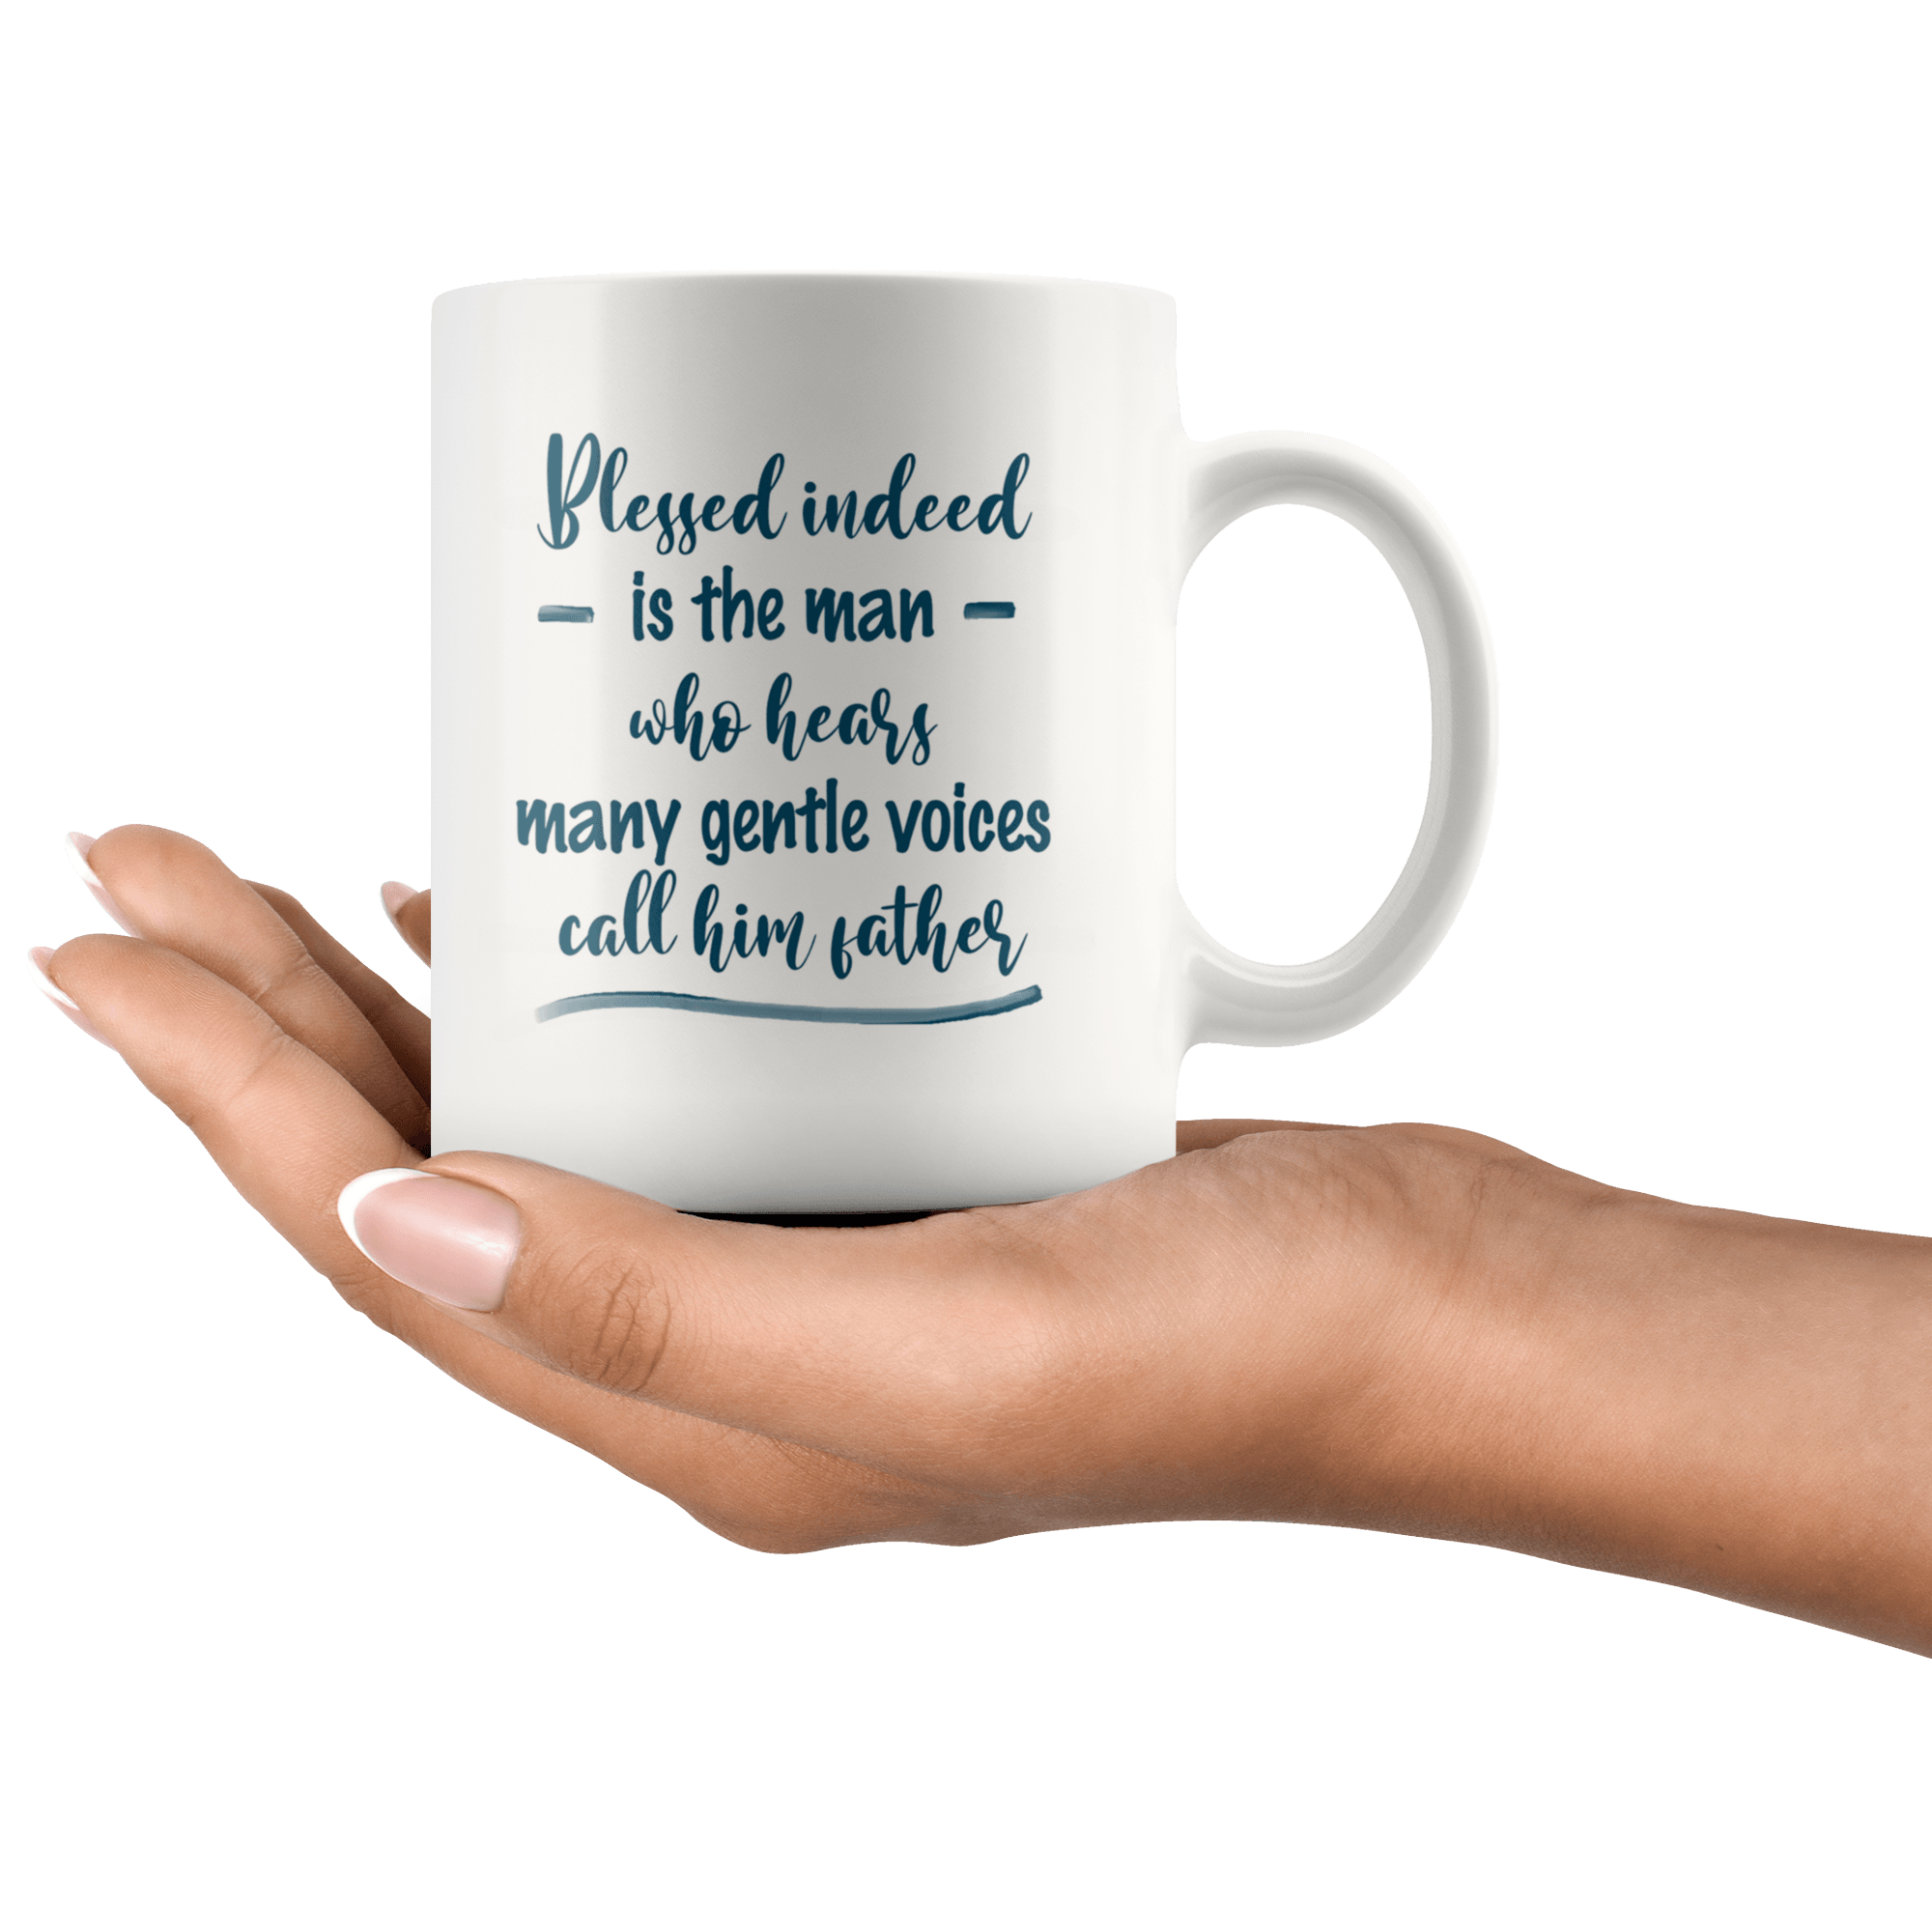 Great Coffee Mug For Father - Blessed Indeed Is The Man Who Hears Many Gentle Voices Call Him Father - SPCM